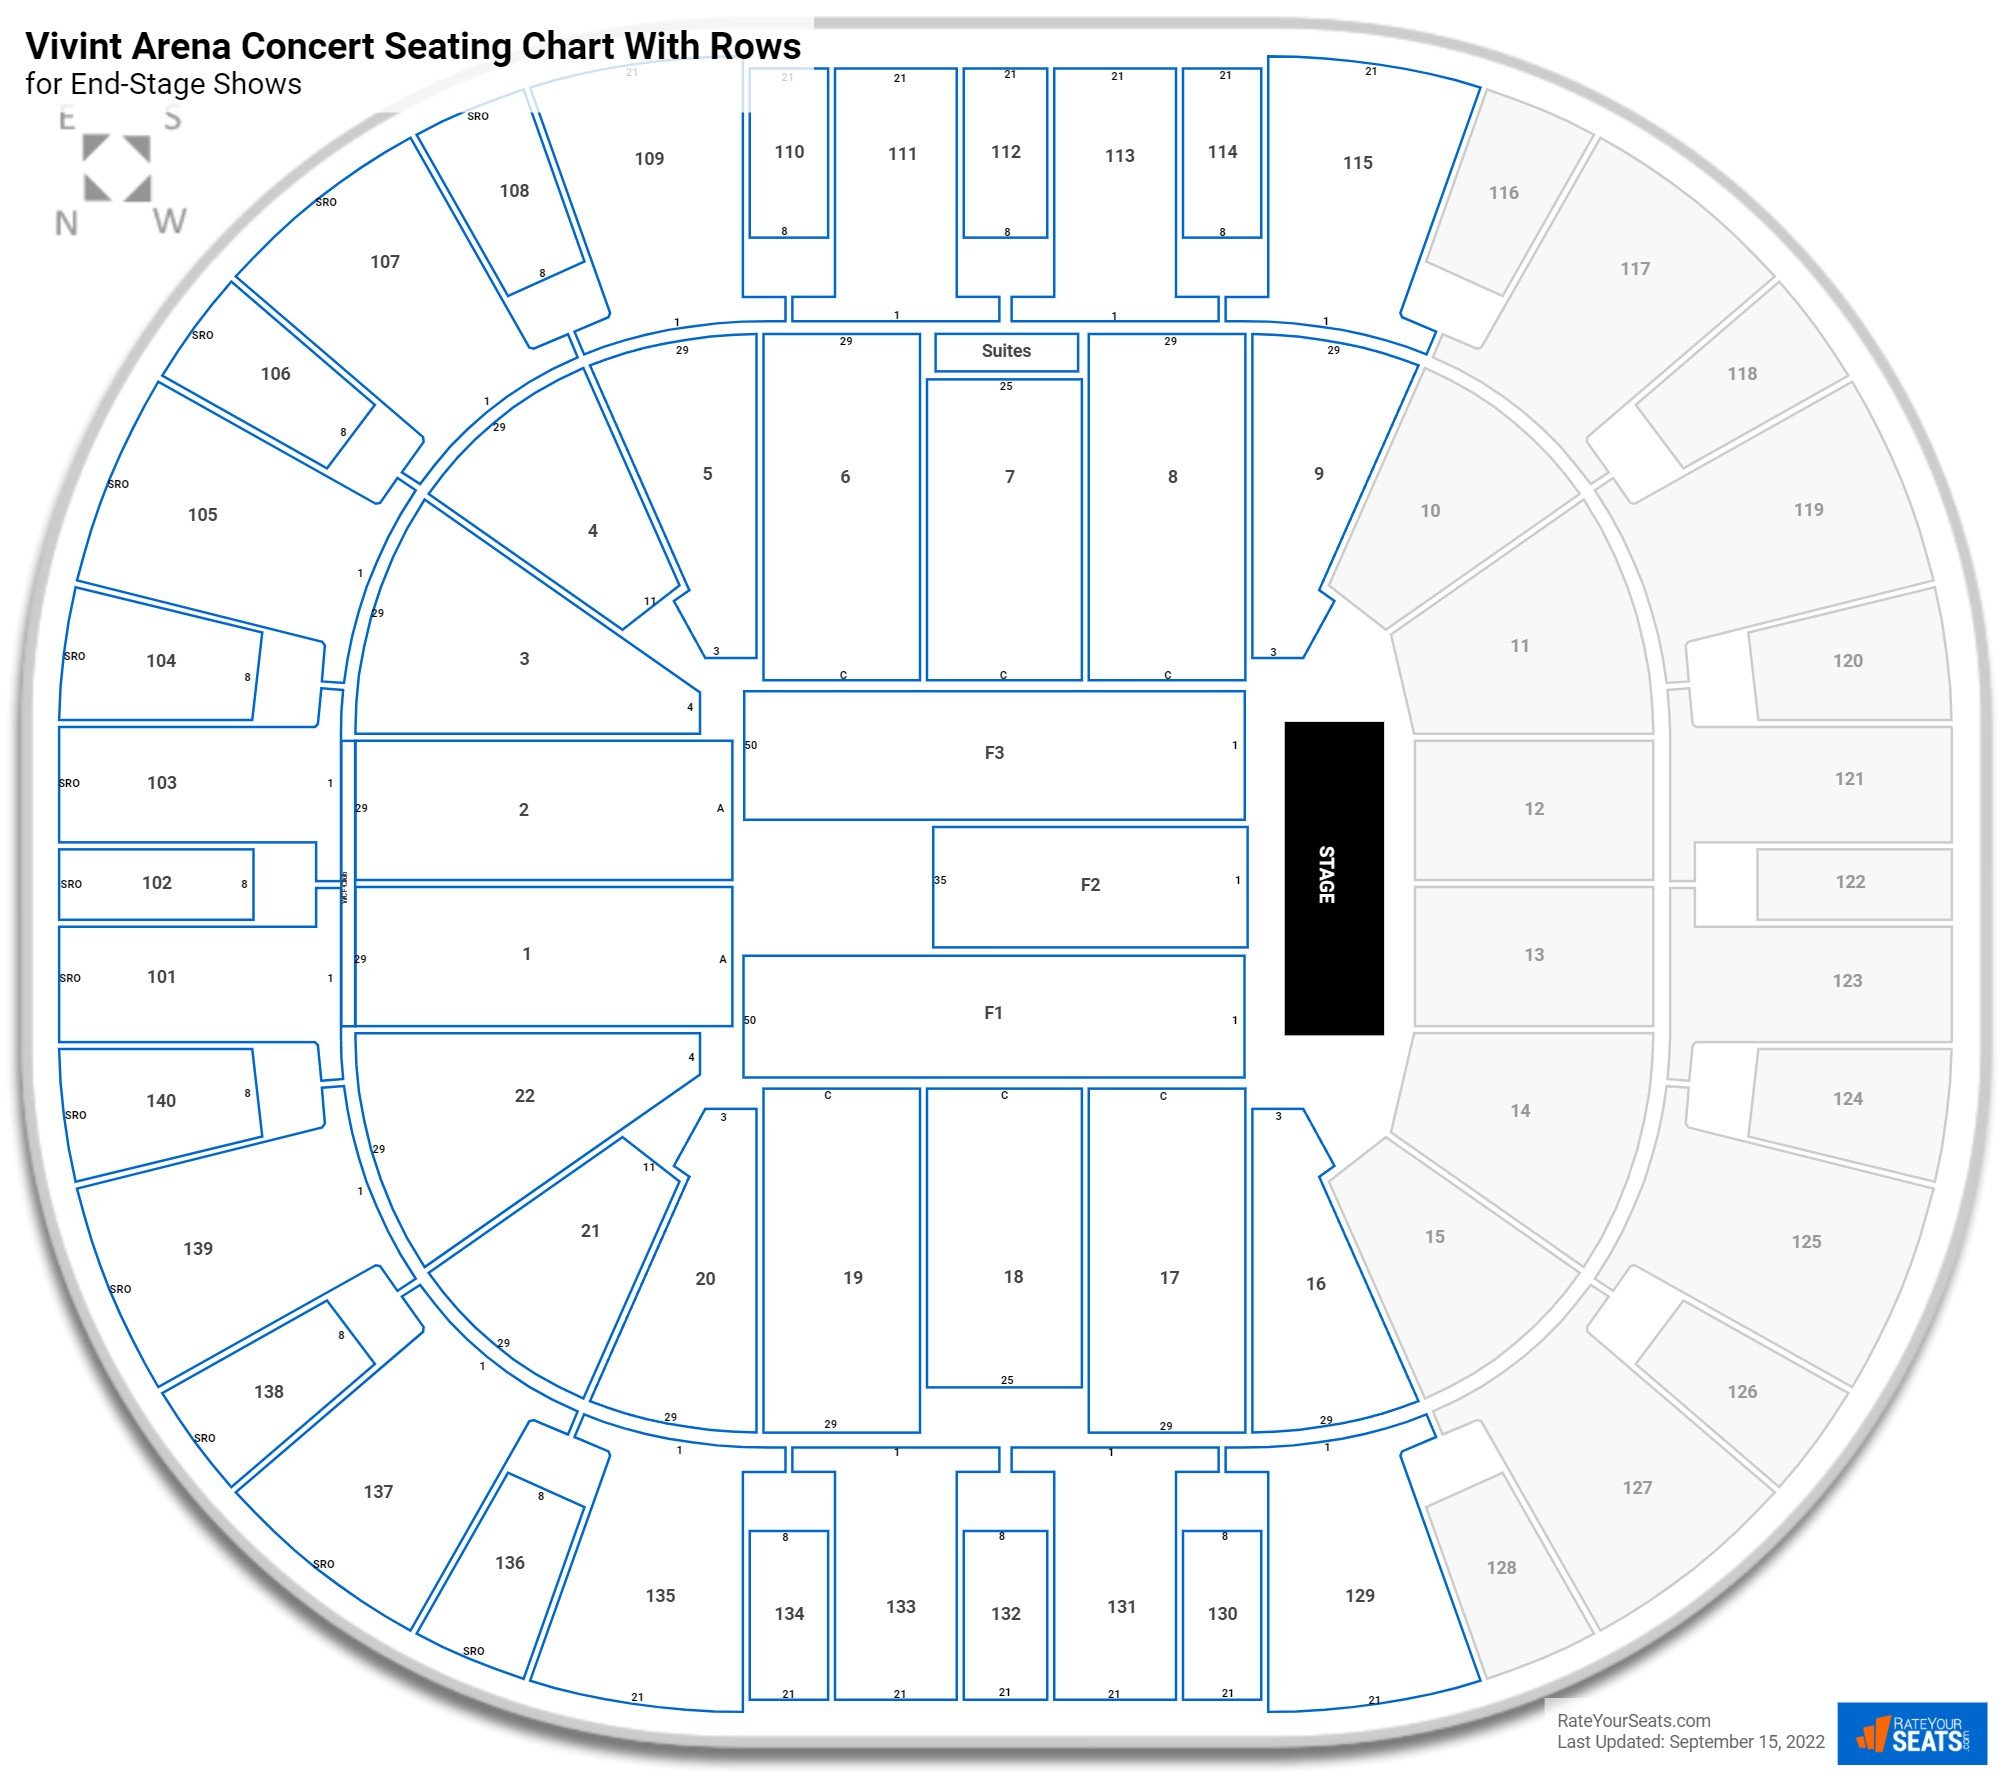 Vivint Smart Home Arena Seating Charts for Concerts